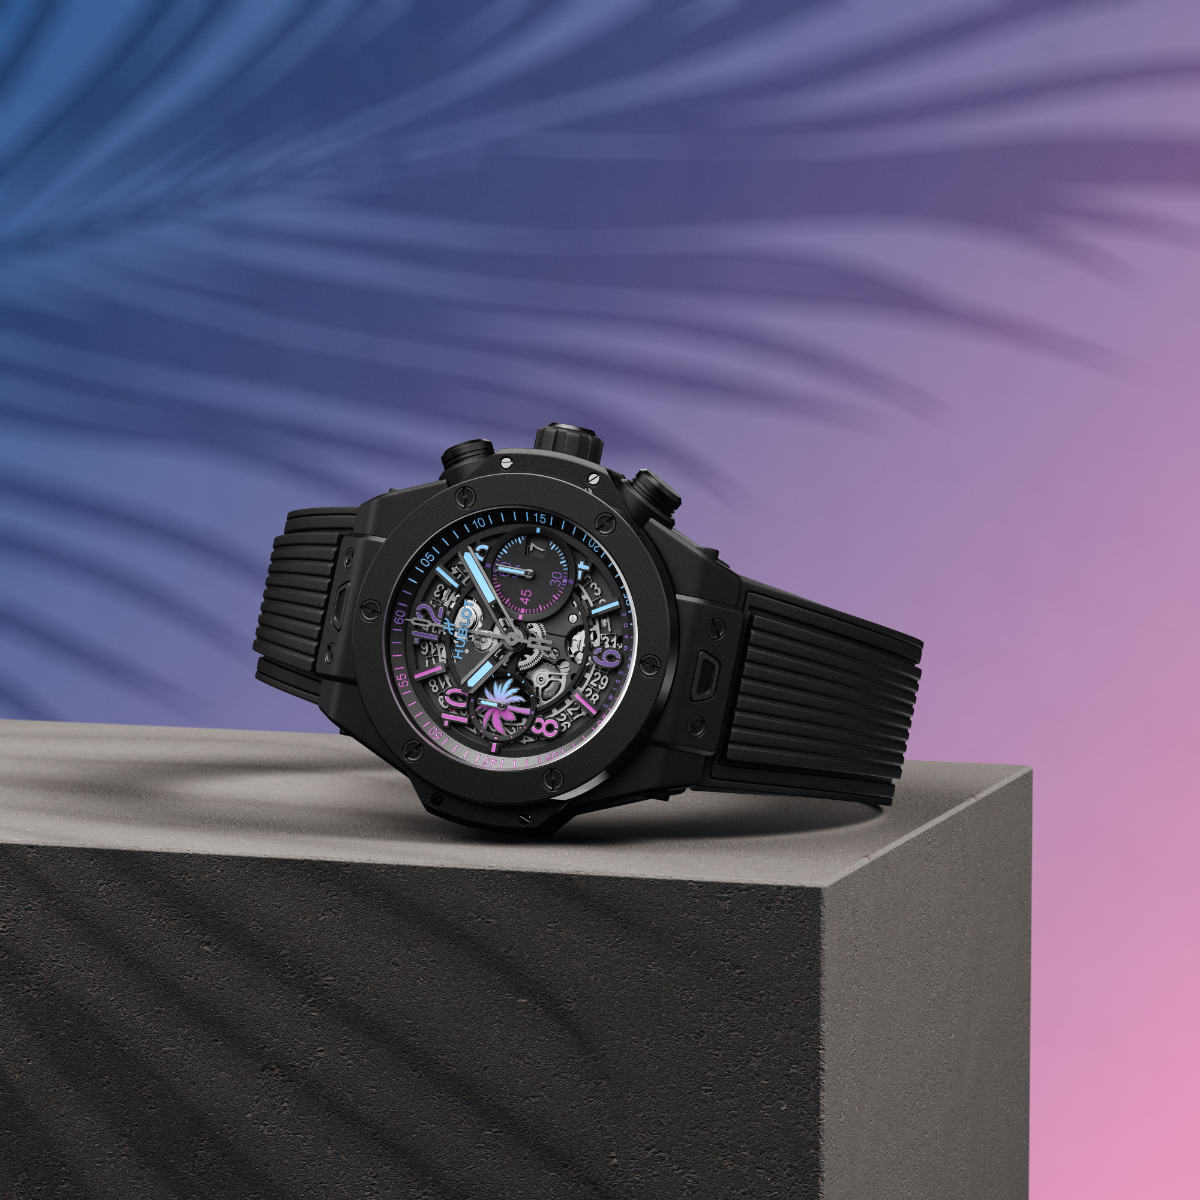 Hublot's Tribute To Miami - A Timepiece As Vibrant As The Magic City Itself